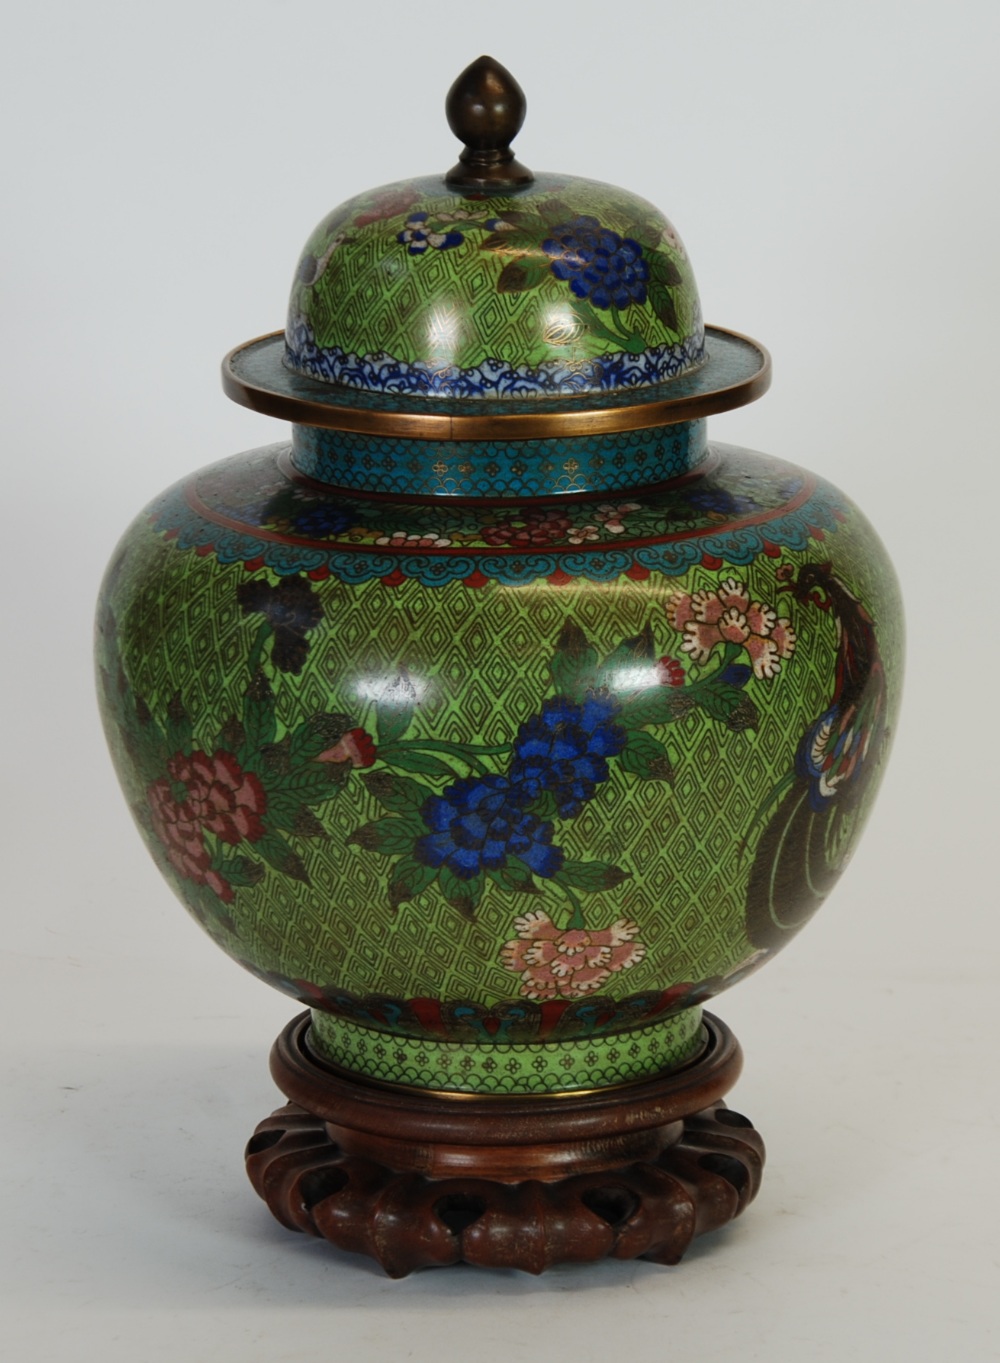 NINETEENTH CENTURY CHINESE CLOISONNE SHOULDERED ORBICULAR JAR WITH DOMED COVER, decorated with two